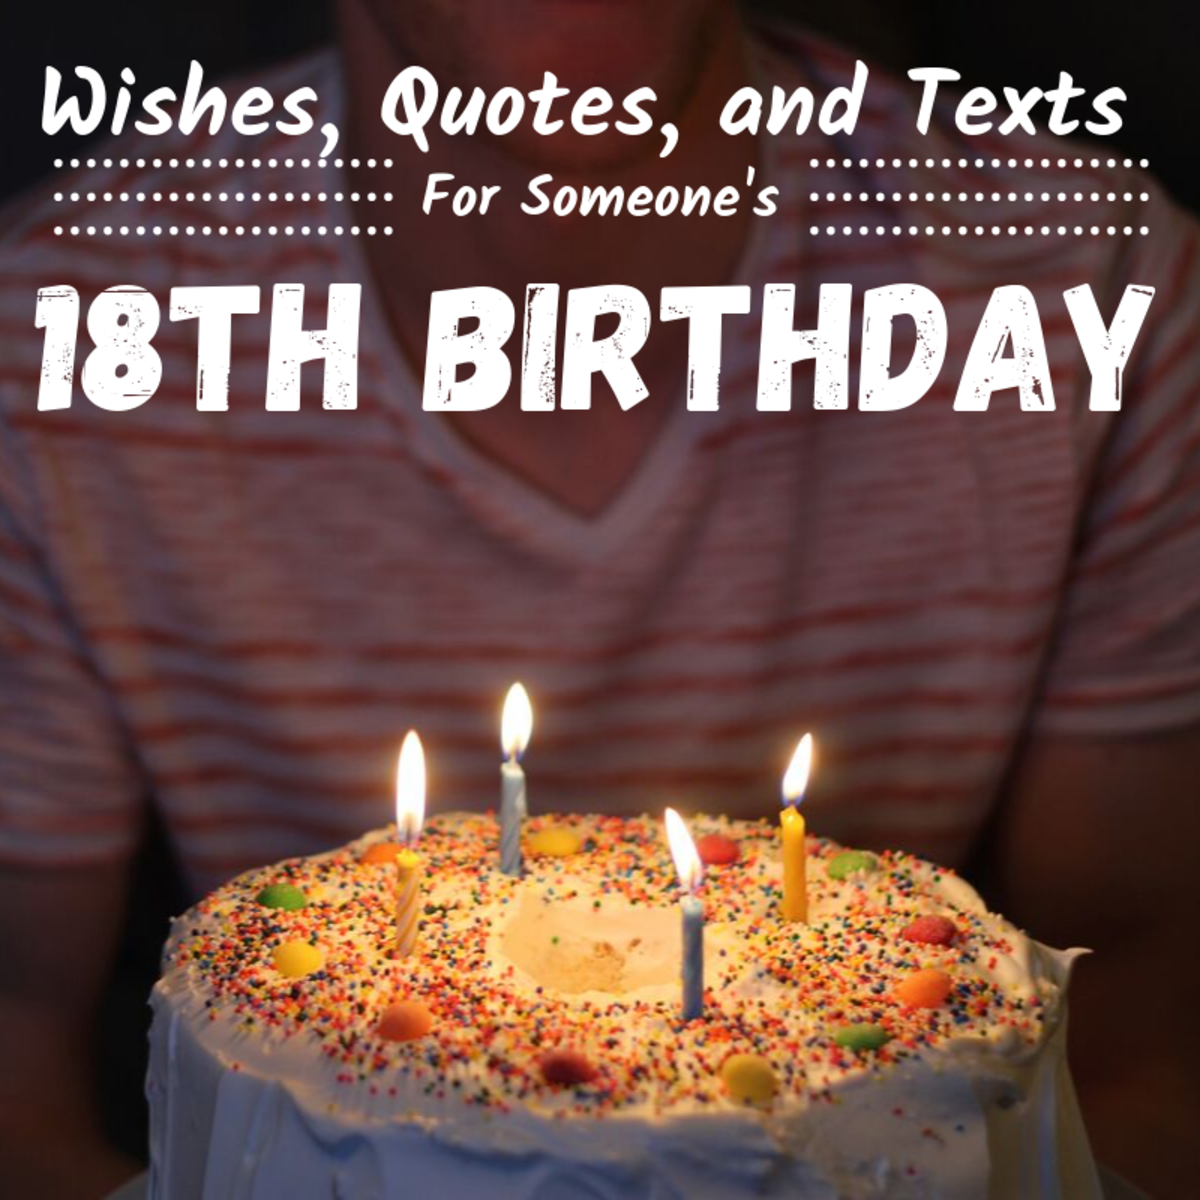 18th Birthday Wishes, Texts, and Quotes: 152 Example ...